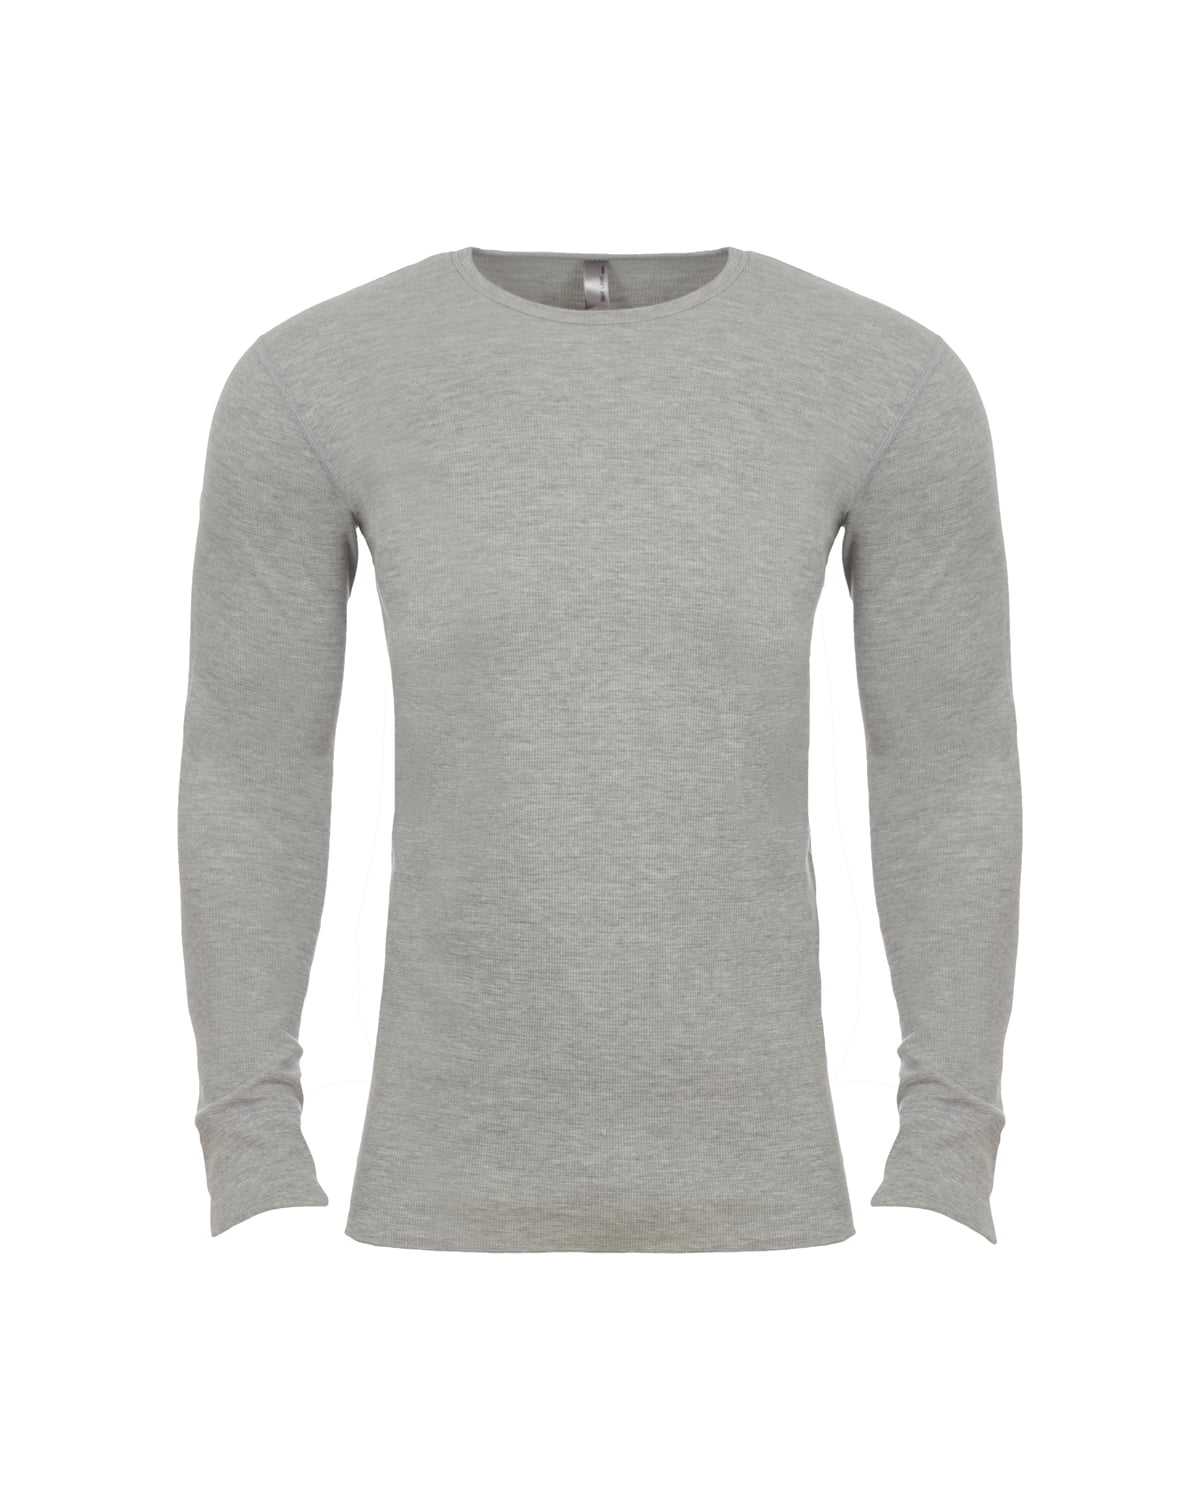 N8201 Next Level Adult Long-Sleeve Thermal 